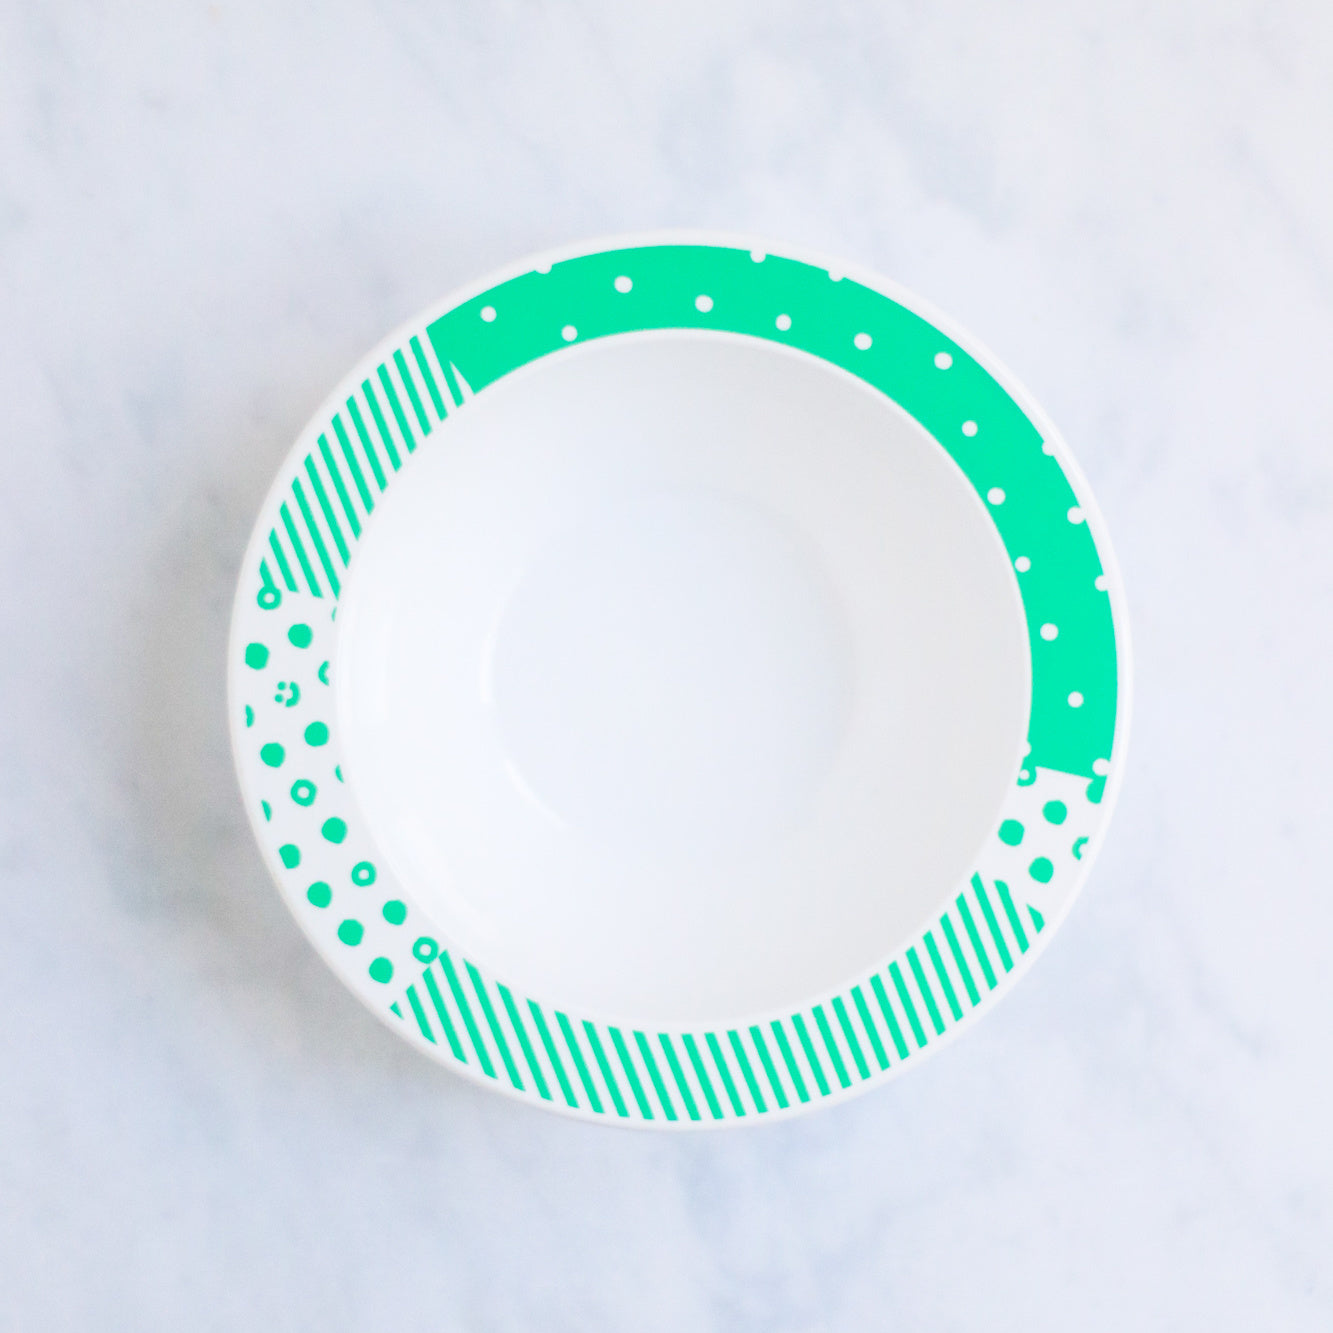 Classsic Range bowl for kids with green and white pattern.